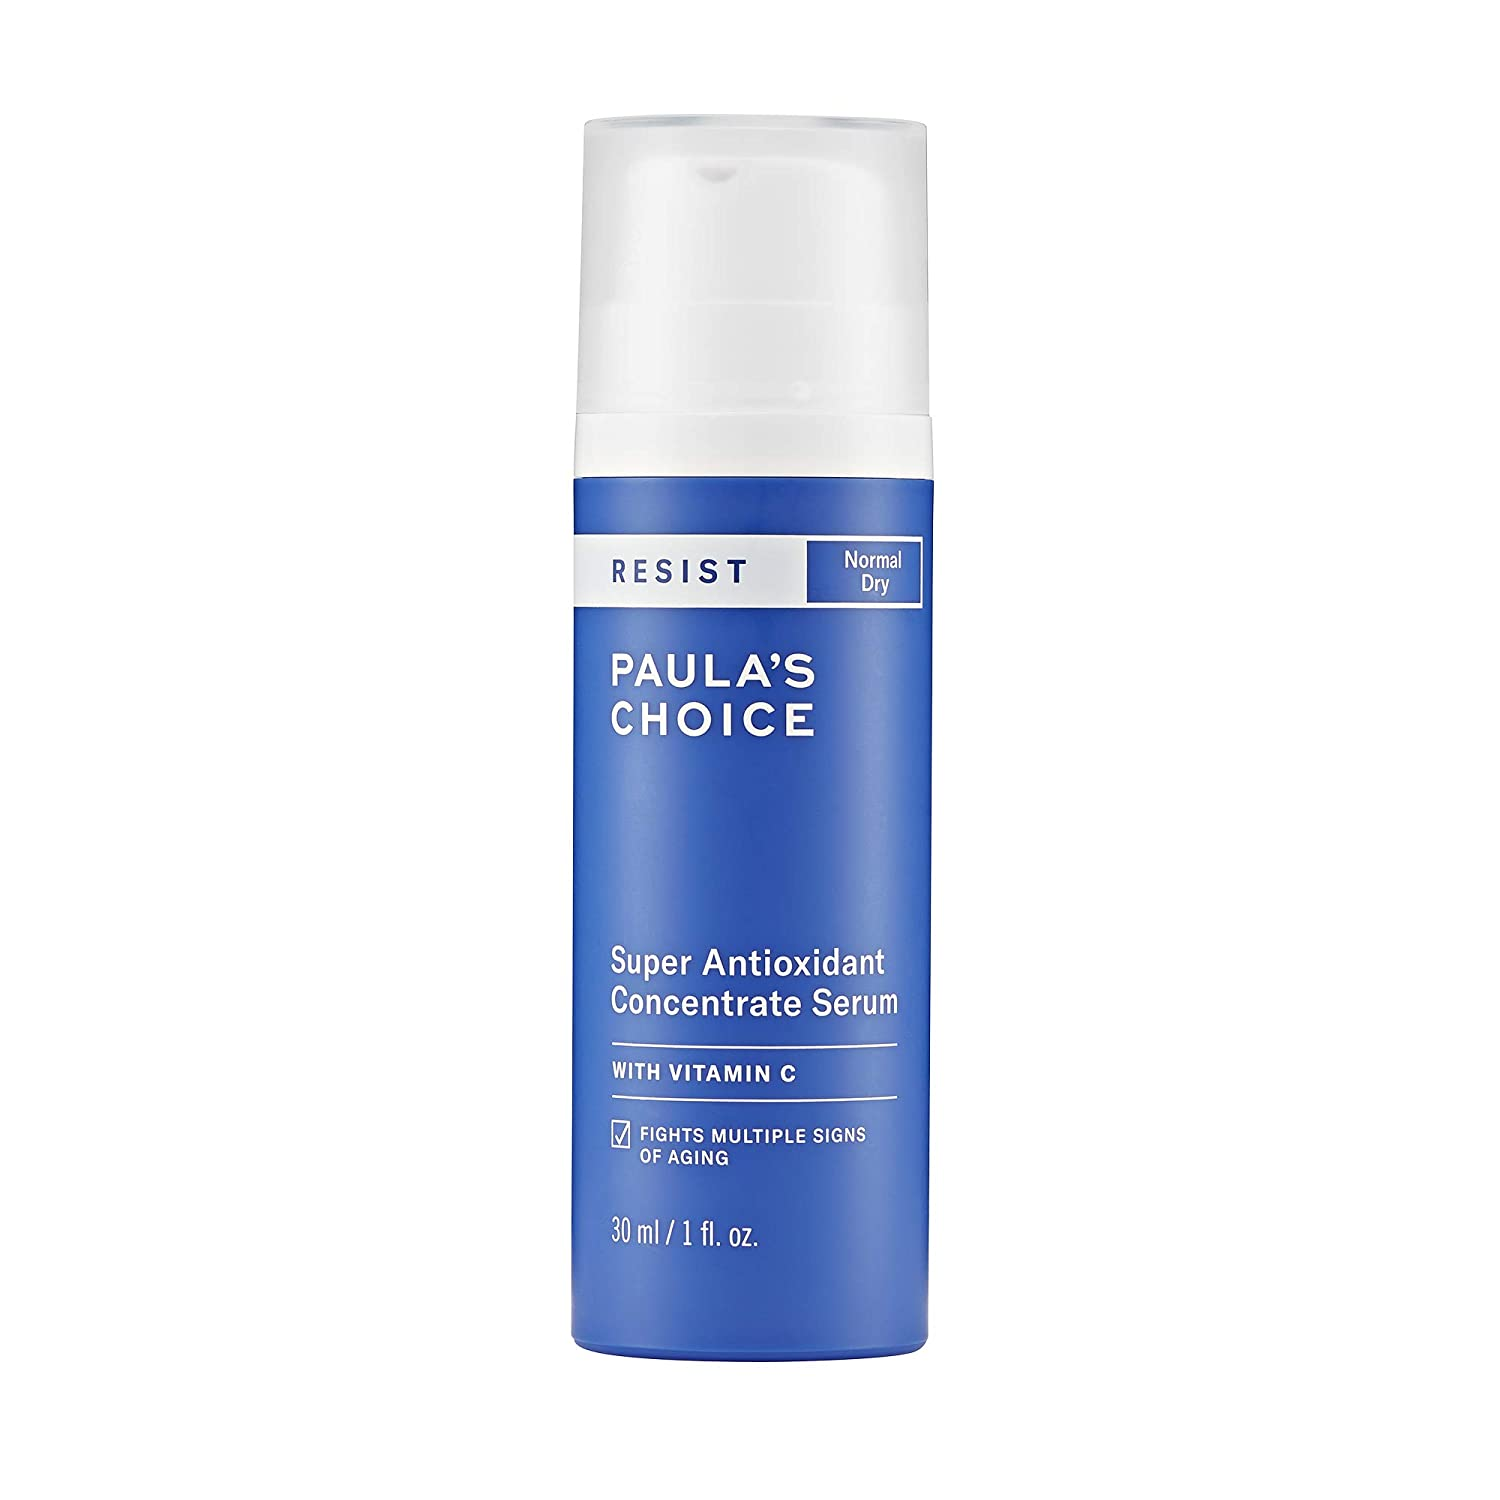 Paula's Choice Super Antioxidant Concentrate Serum comes with Vitamin C is a silky serum with stabilized Vitamin C & peptides plus potent antioxidants that restores hydration to dry sun damaged skin.